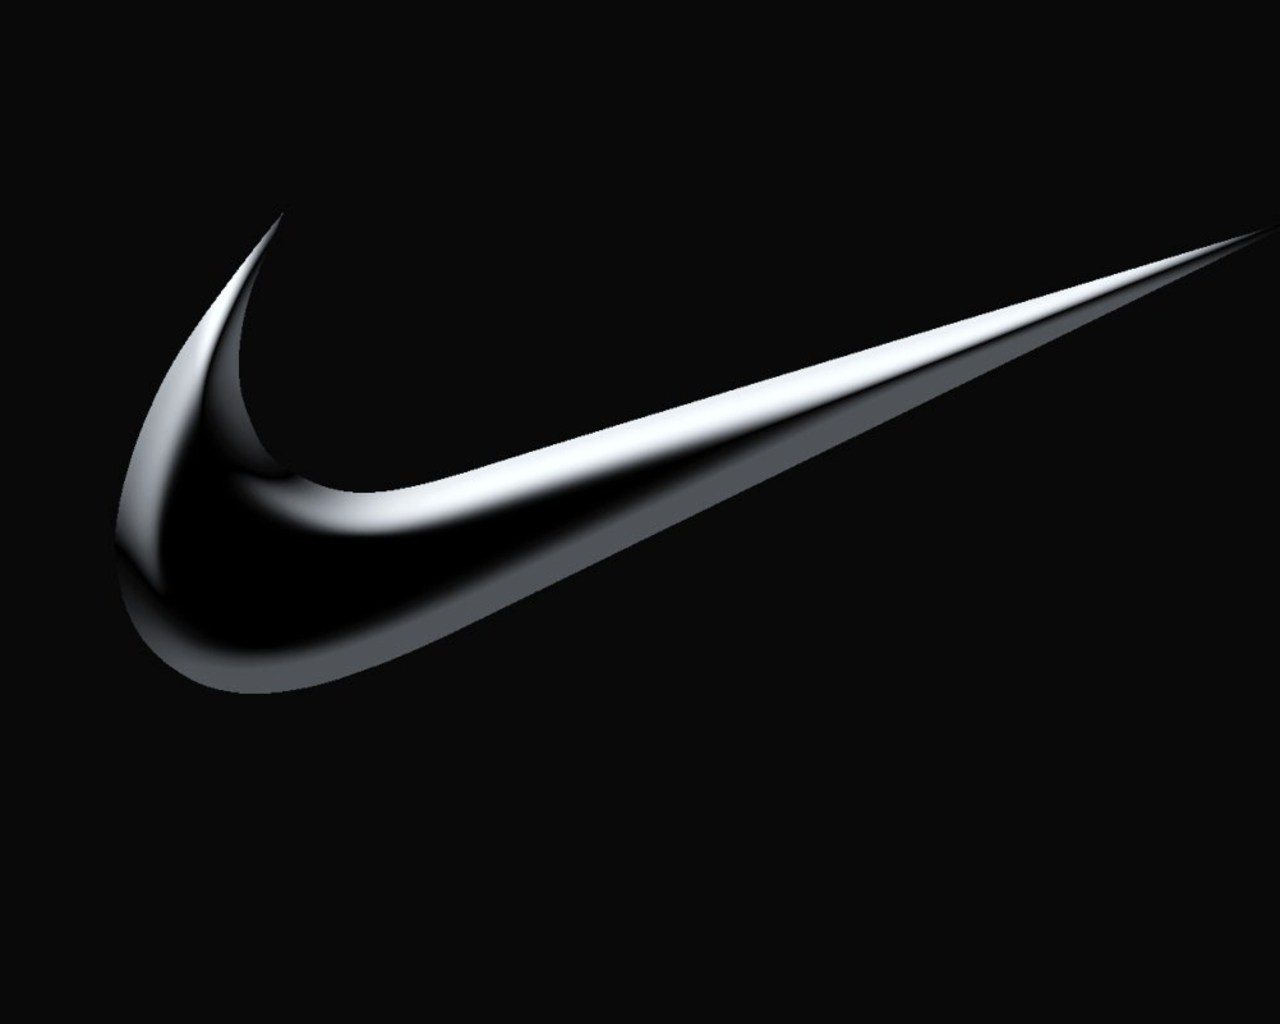 Gold Nike Logo Wallpaper Images amp Pictures   Becuo